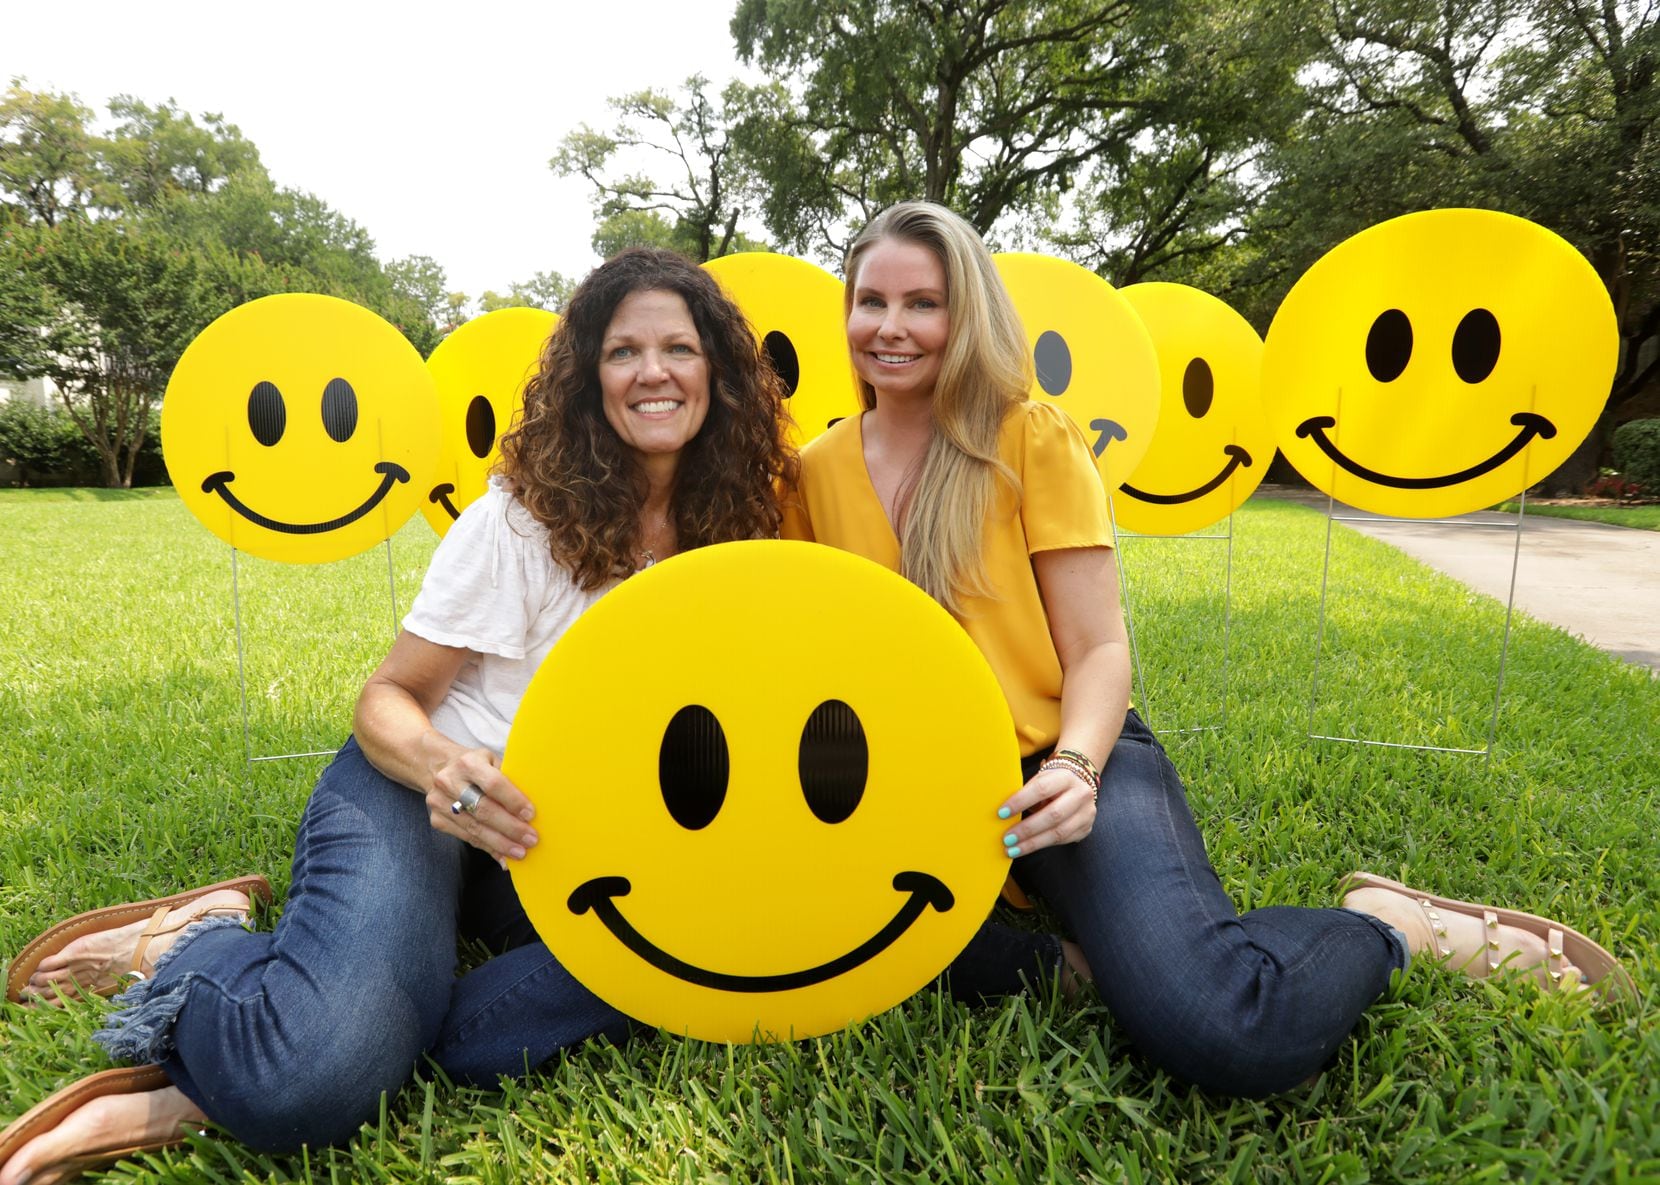 Joanie Curry (left) and Chelsea Davenport bonded over the power of a smiley face to brighten people’s day.